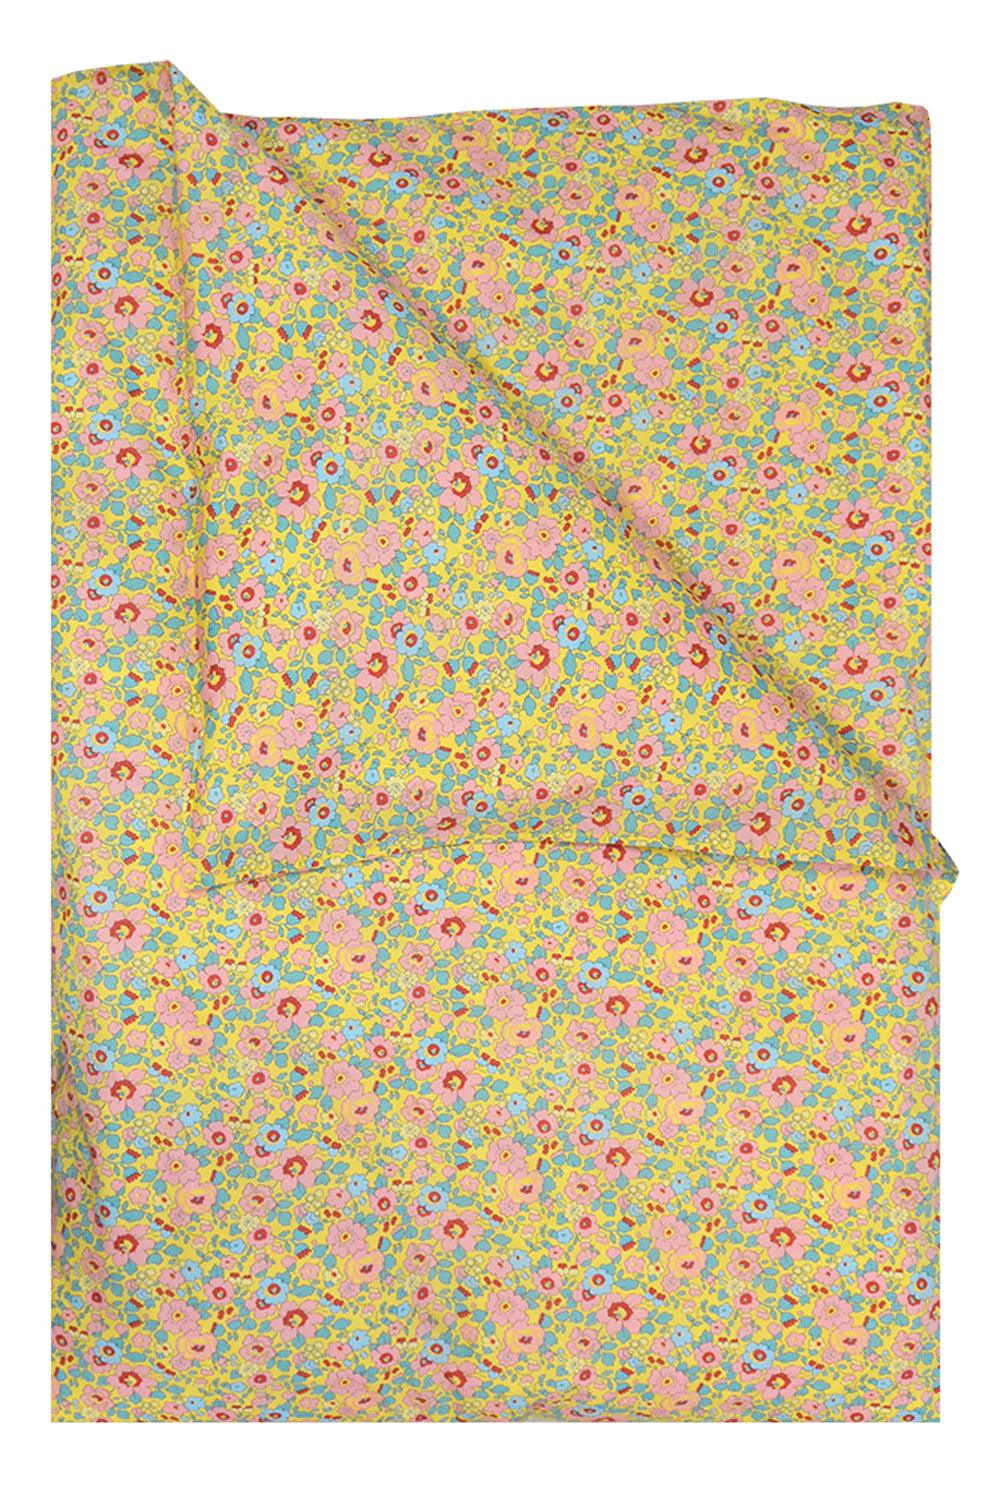 Bedding made with Liberty Fabric BETSY SUNFLOWER - Coco & Wolf